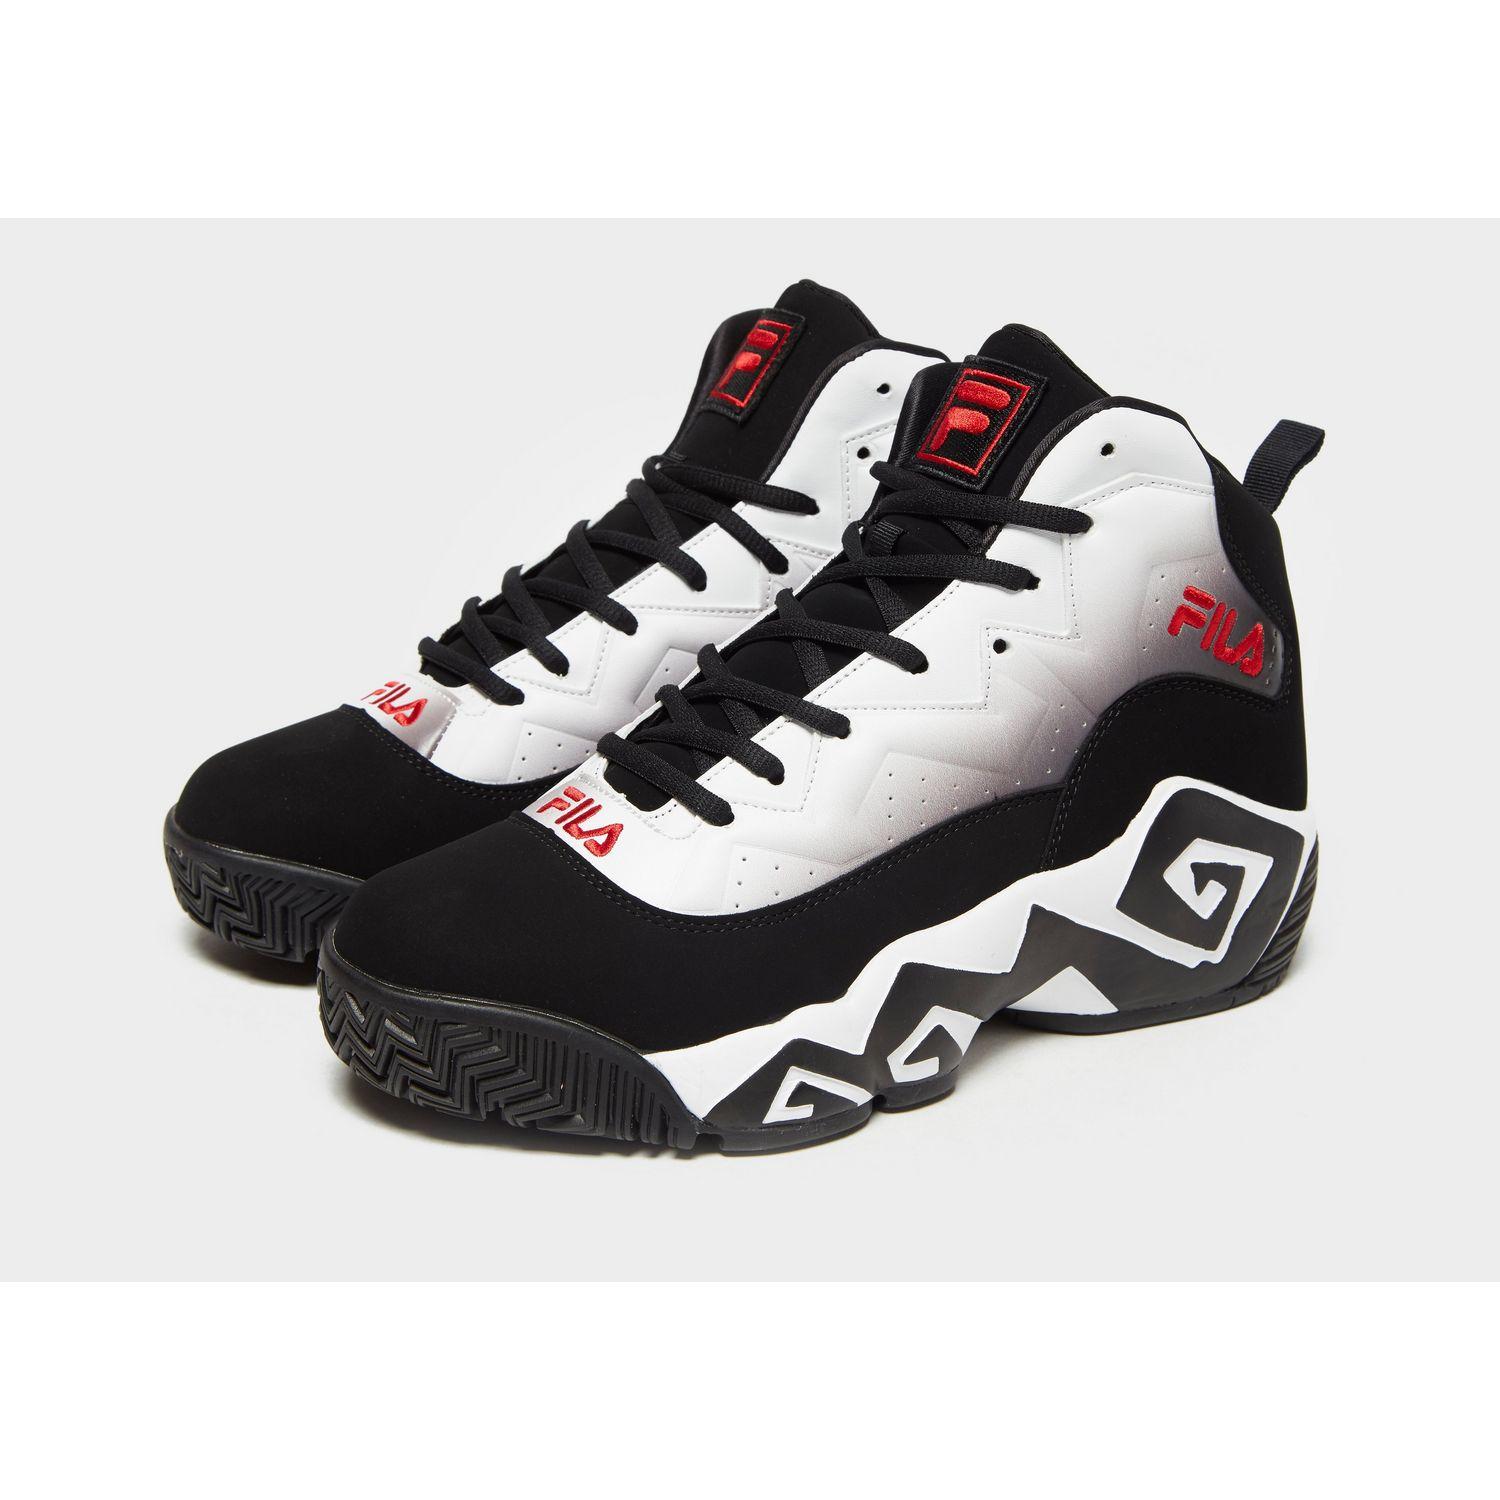 Fila Leather Mb Fade in Black/White/Red (Black) for Men - Lyst